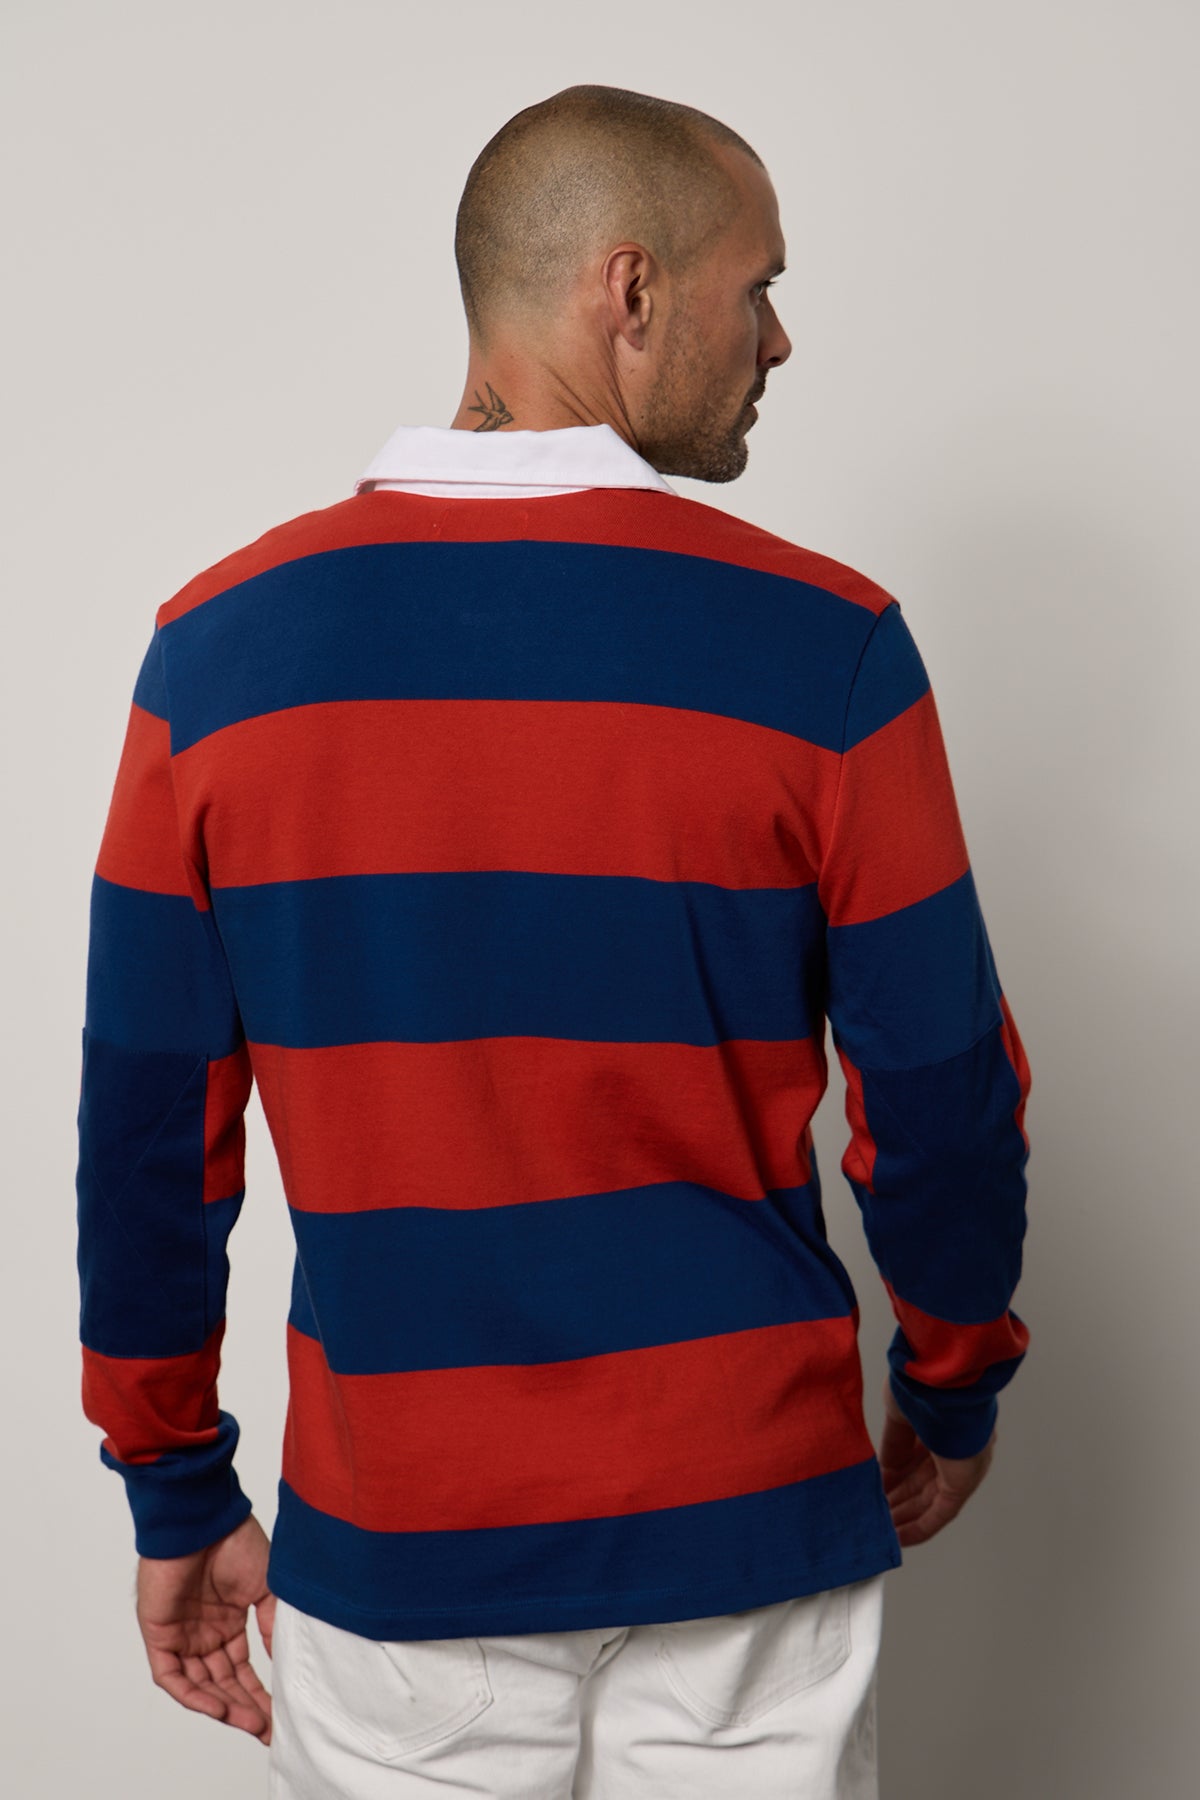 Pierre Rugby Stripe long sleeve polol with broad blue and red stripes and white collar with white denim back-25994790535361